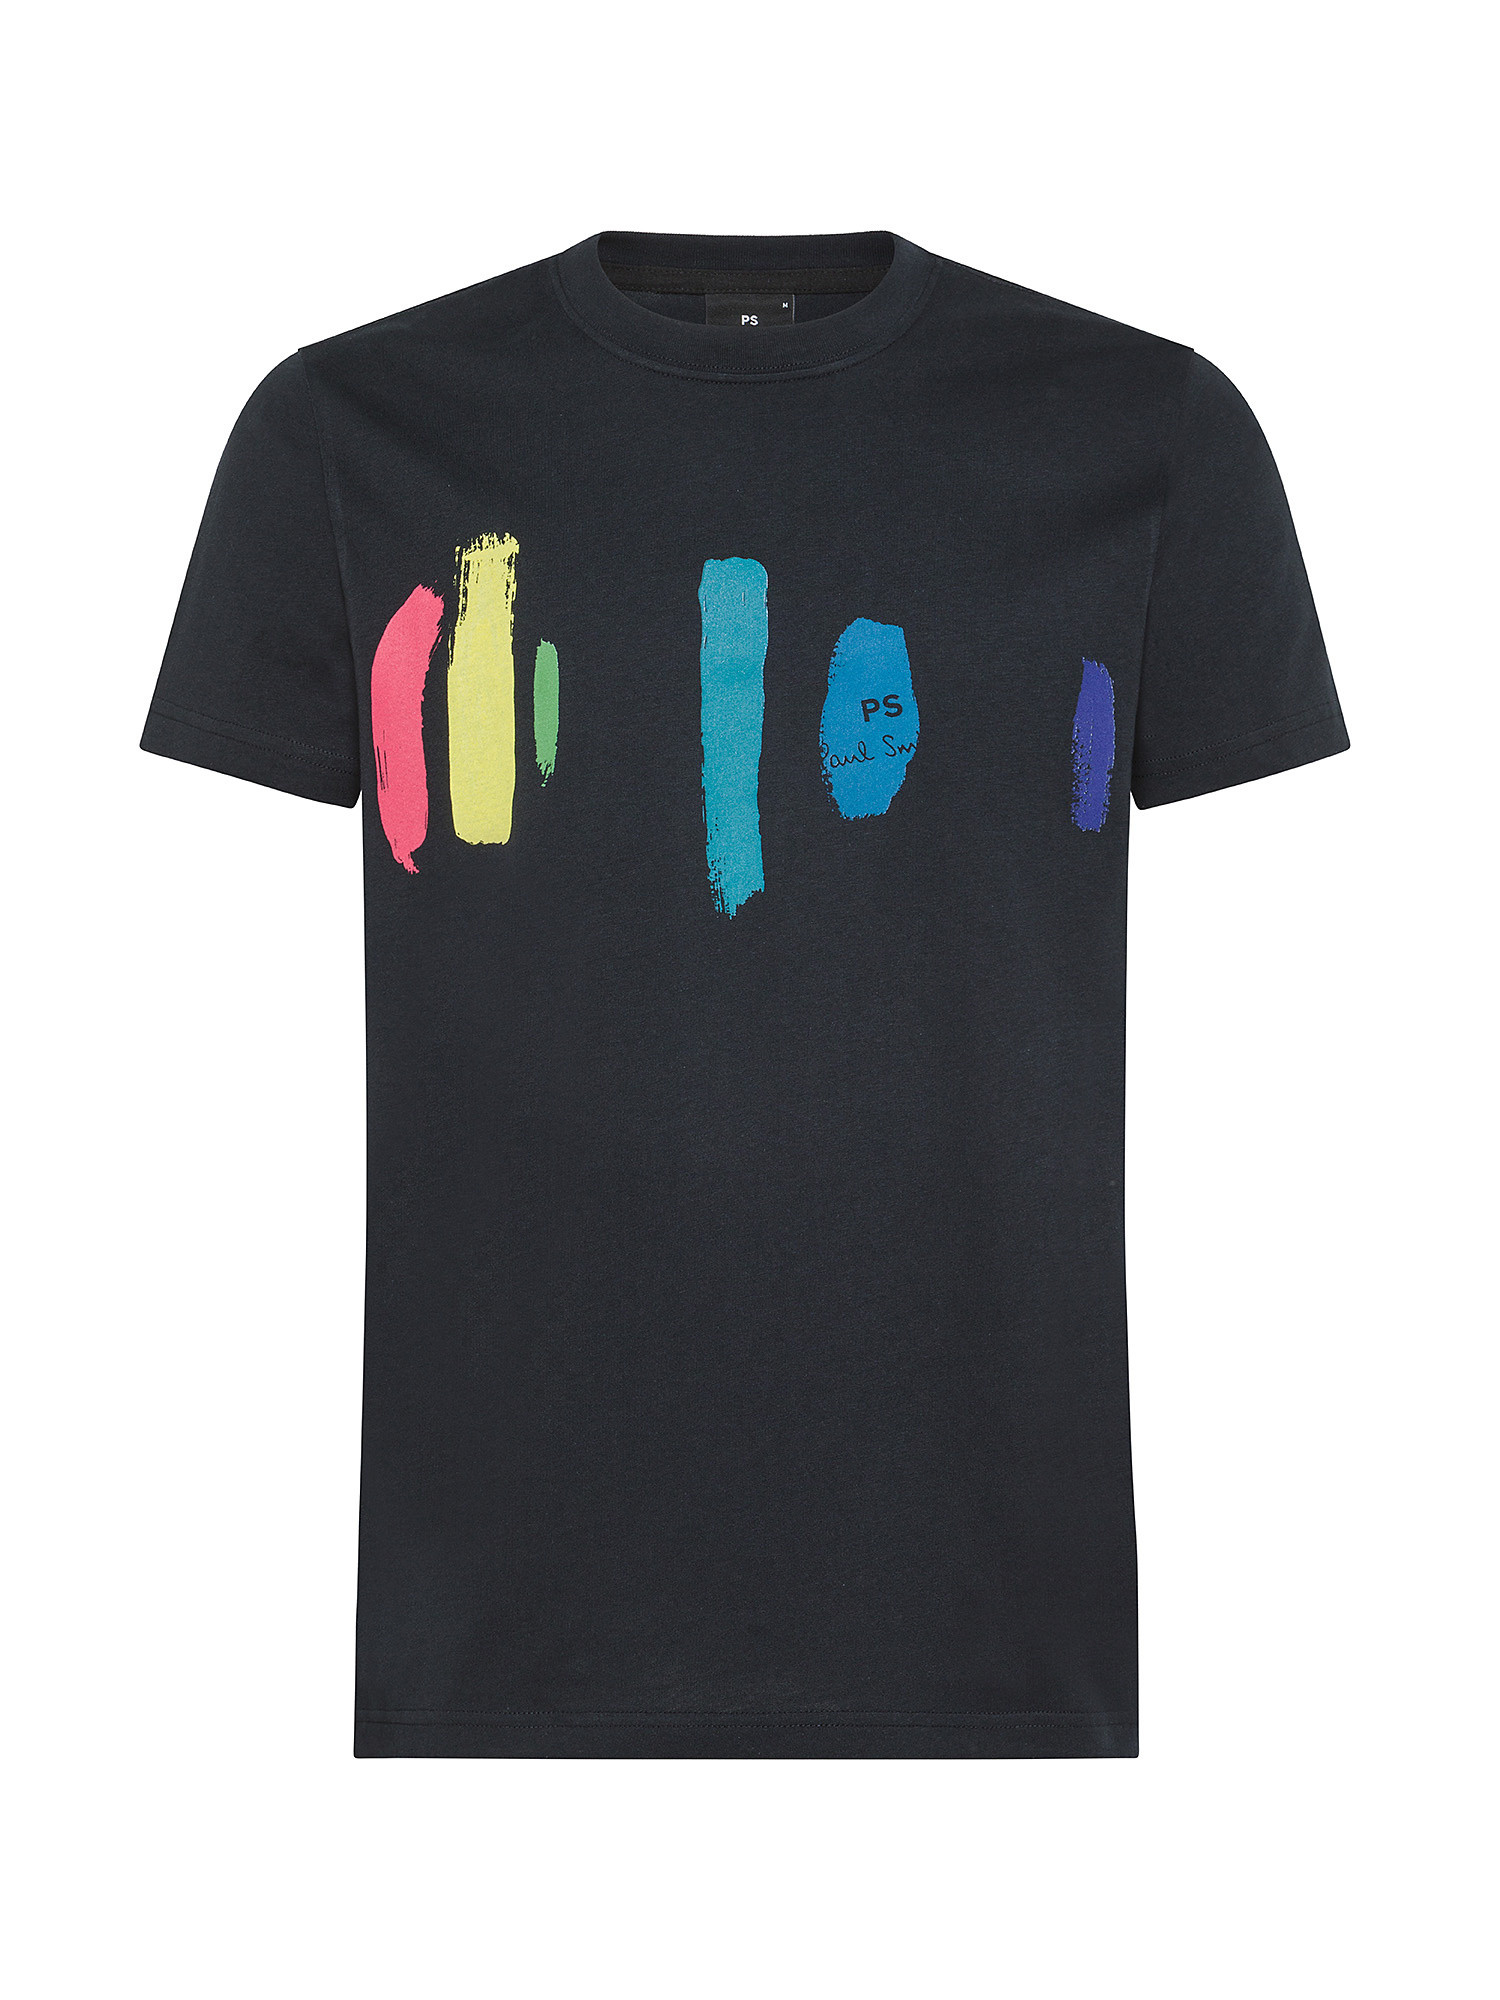 Paul Smith - T-shirt in cotone slim fit con stampa pennellate, Blu scuro, large image number 0